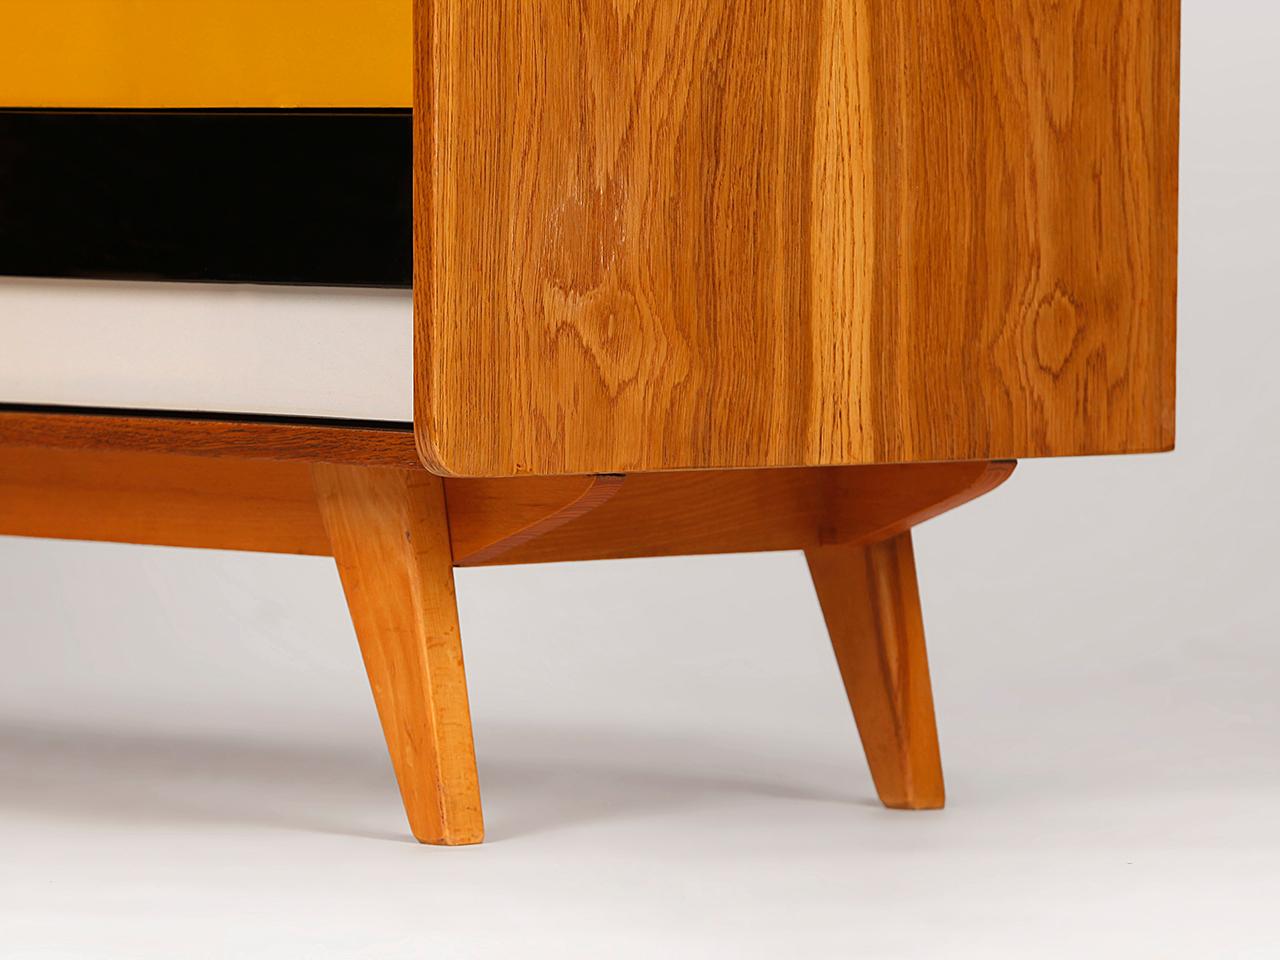 Sideboard U 453 by Jiri Jiroutek for Interier Praha with Wooden Drawers, 1960s For Sale 1